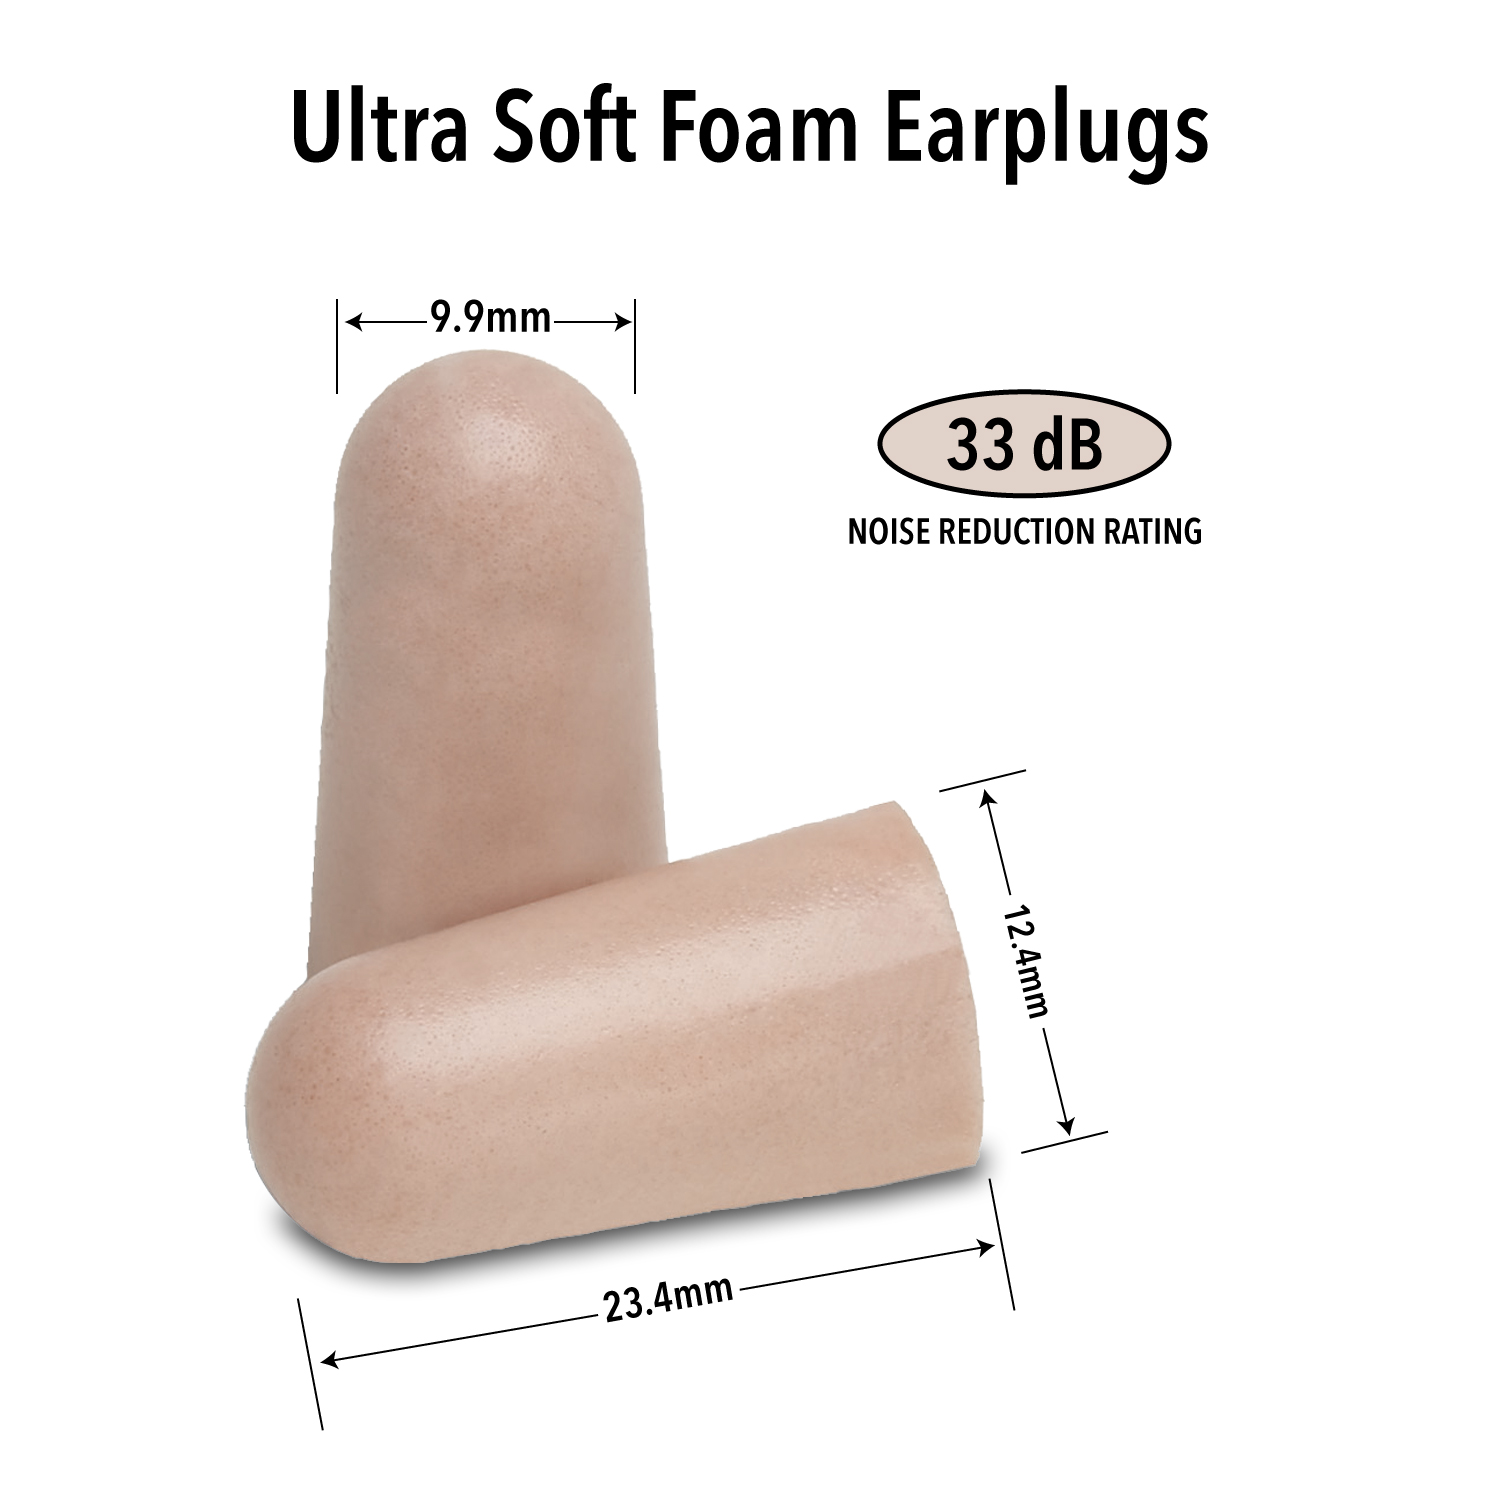 Mack's Ultra Soft Foam Earplugs, 10 Pair - 33dB Highest NRR, Comfortable Ear Plugs for Sleeping, Snoring, Work, Travel and Loud Events - image 3 of 7